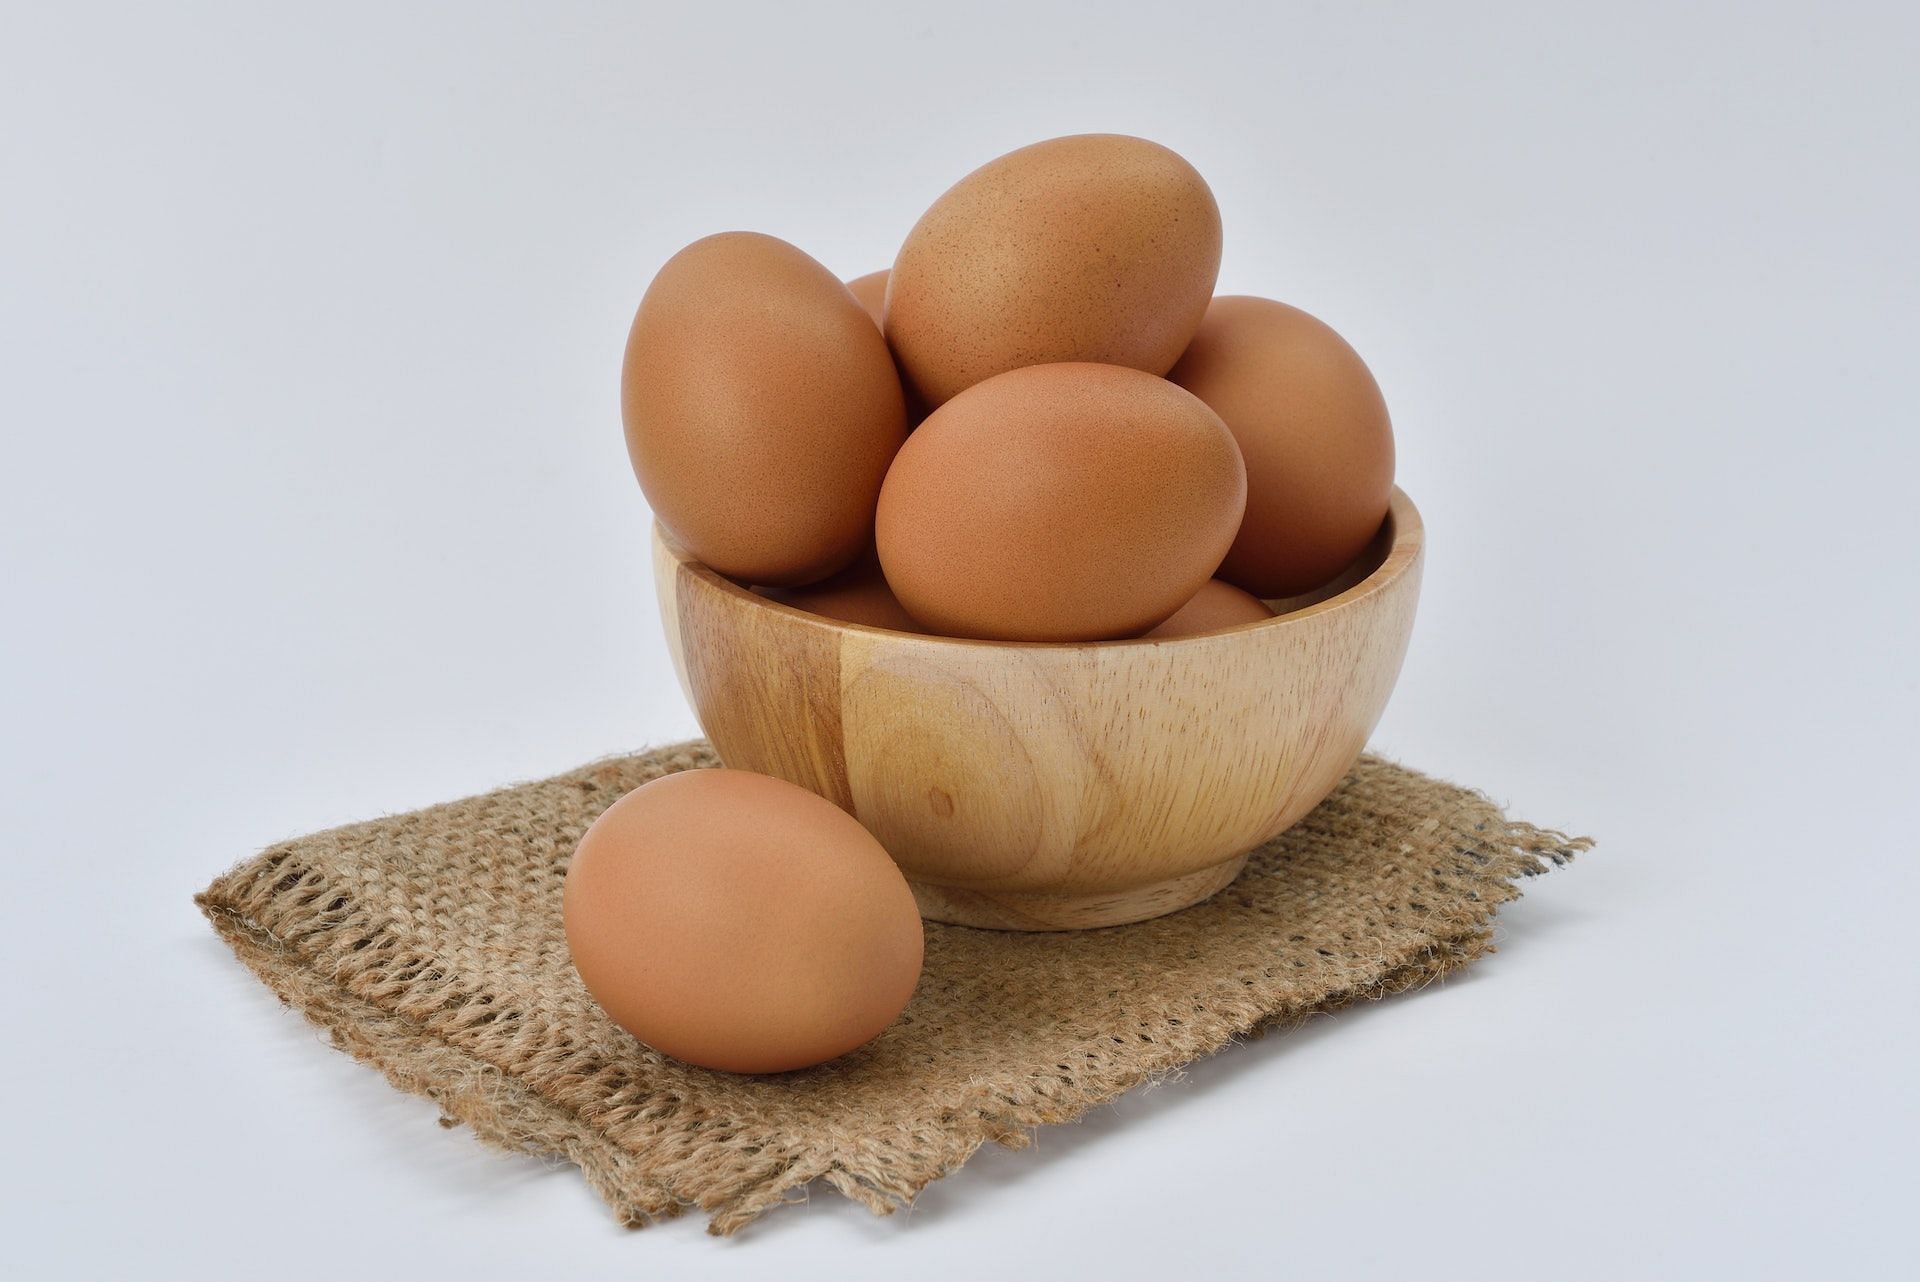 Add eggs to your diet to prevent vitamin A deficiency. (Image via Pexels/Pixabay)